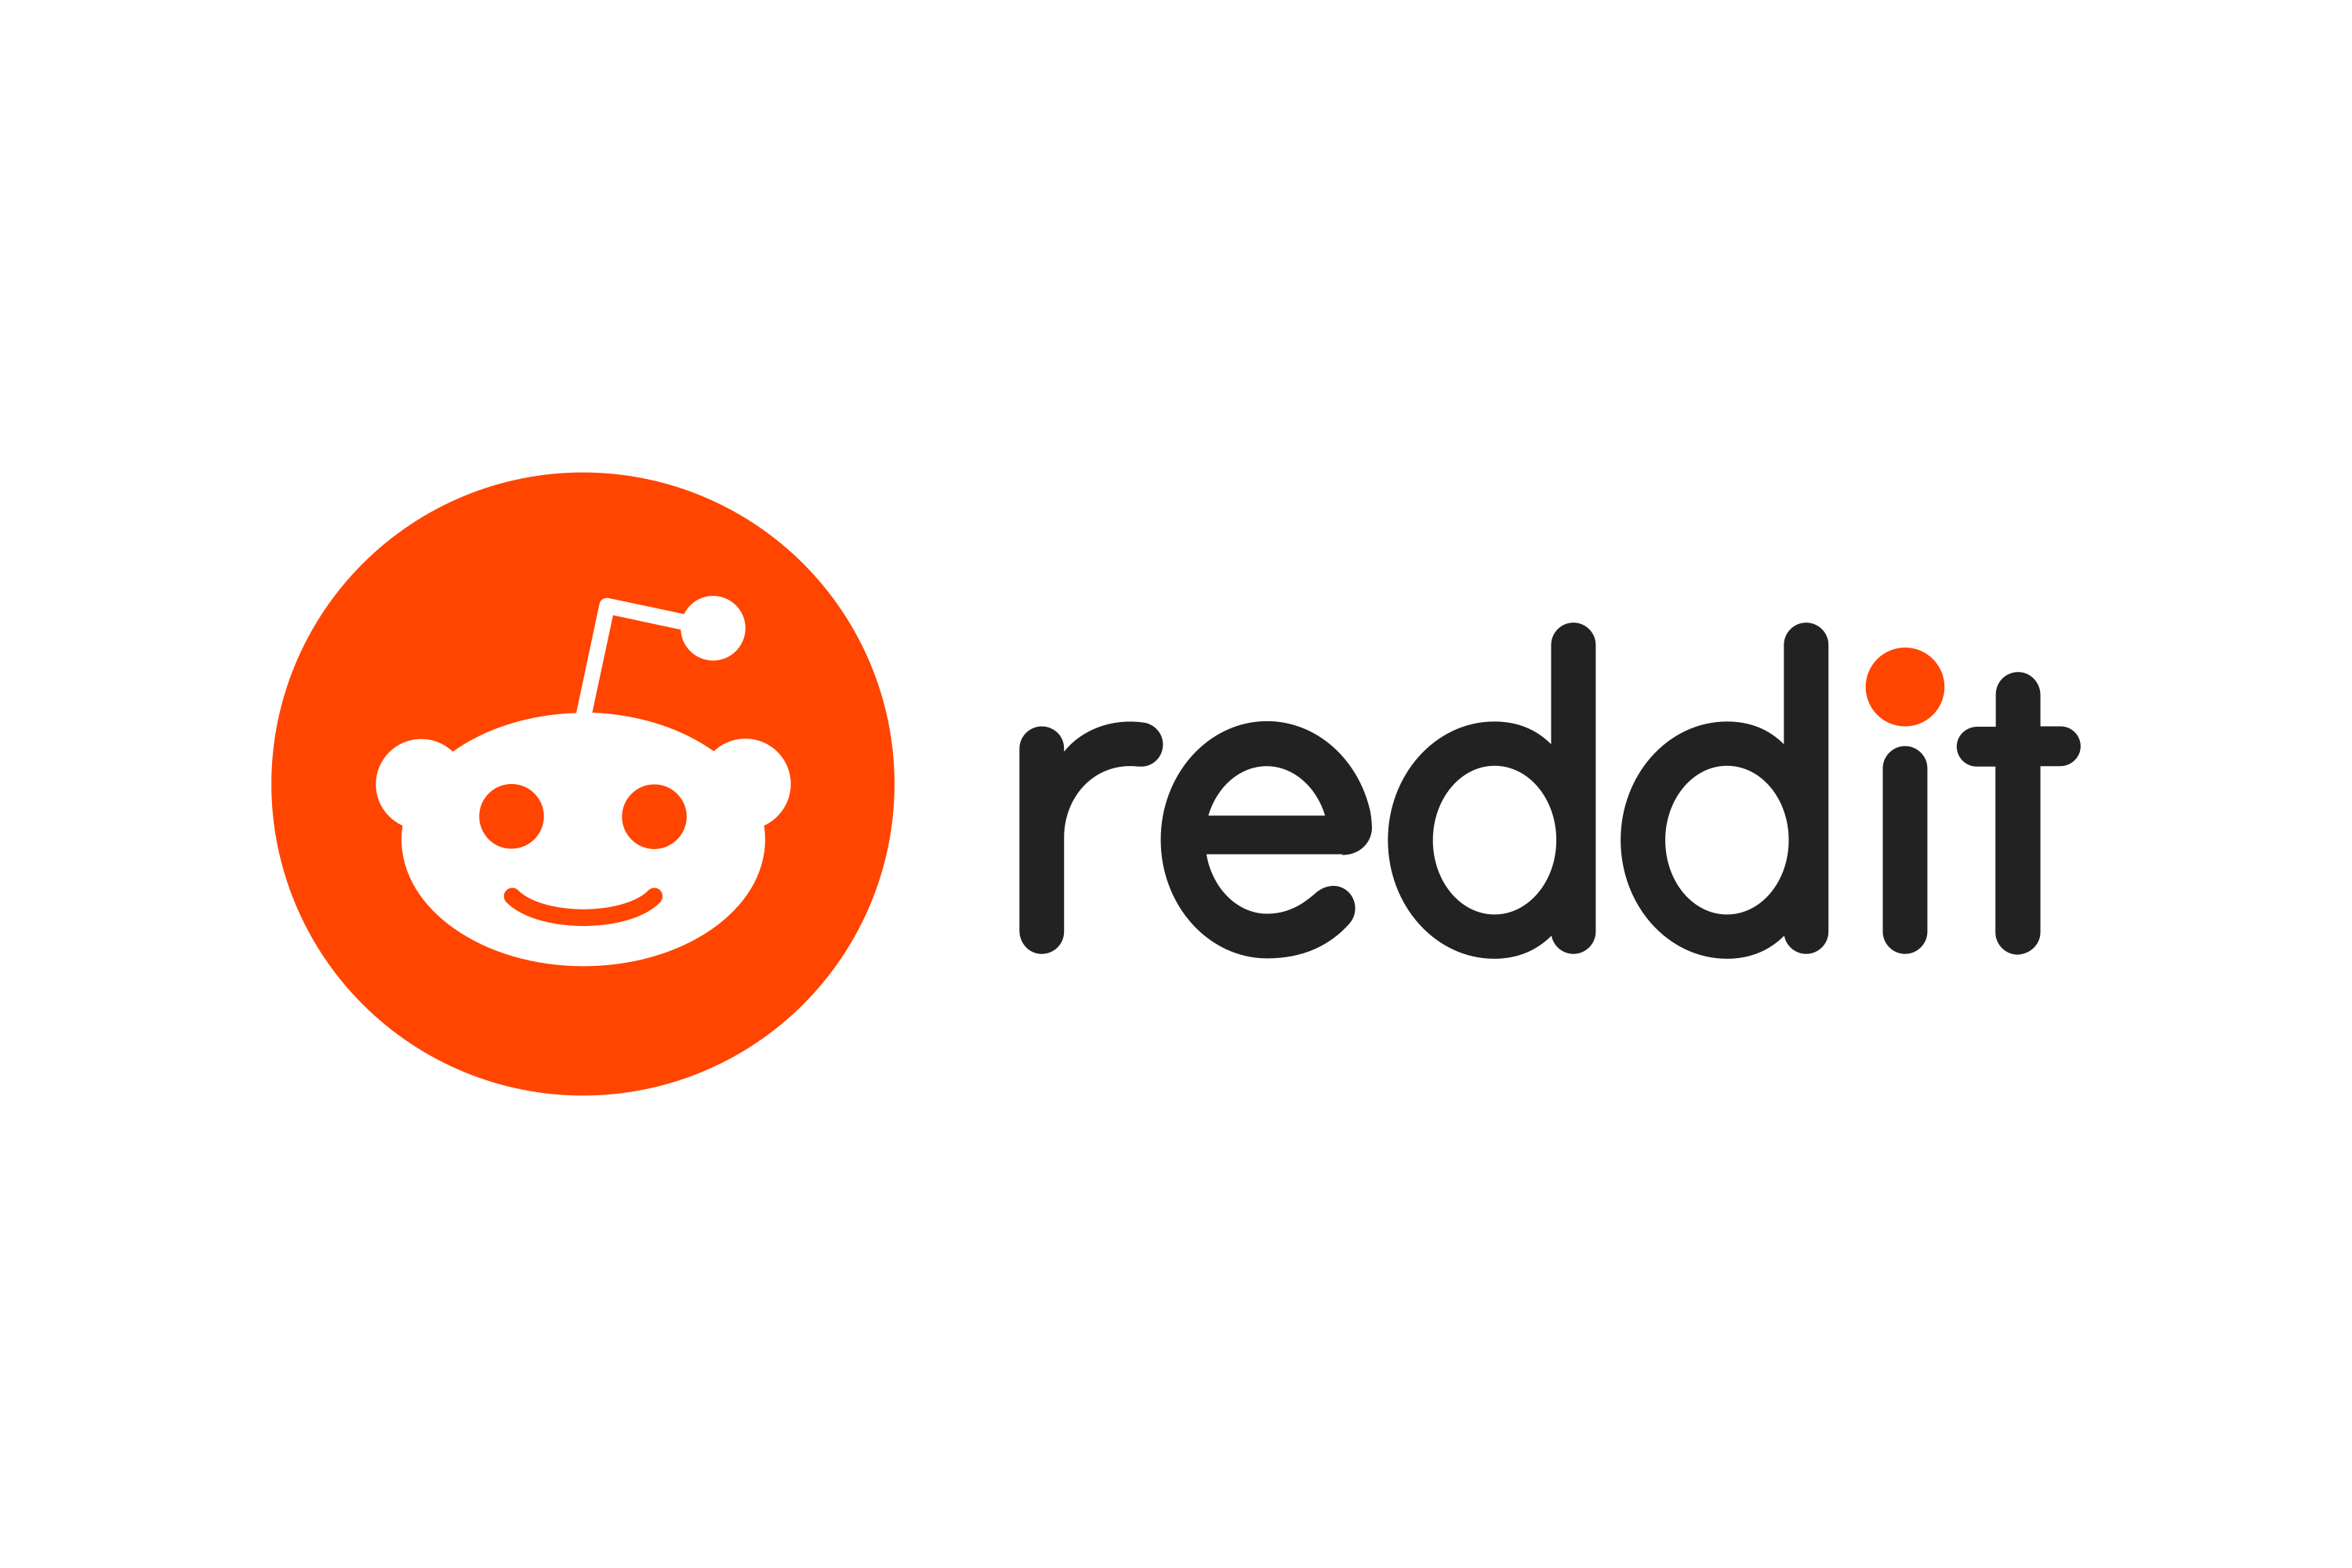 Film Studios Strike Out a Third Time to Obtain Reddit User Information